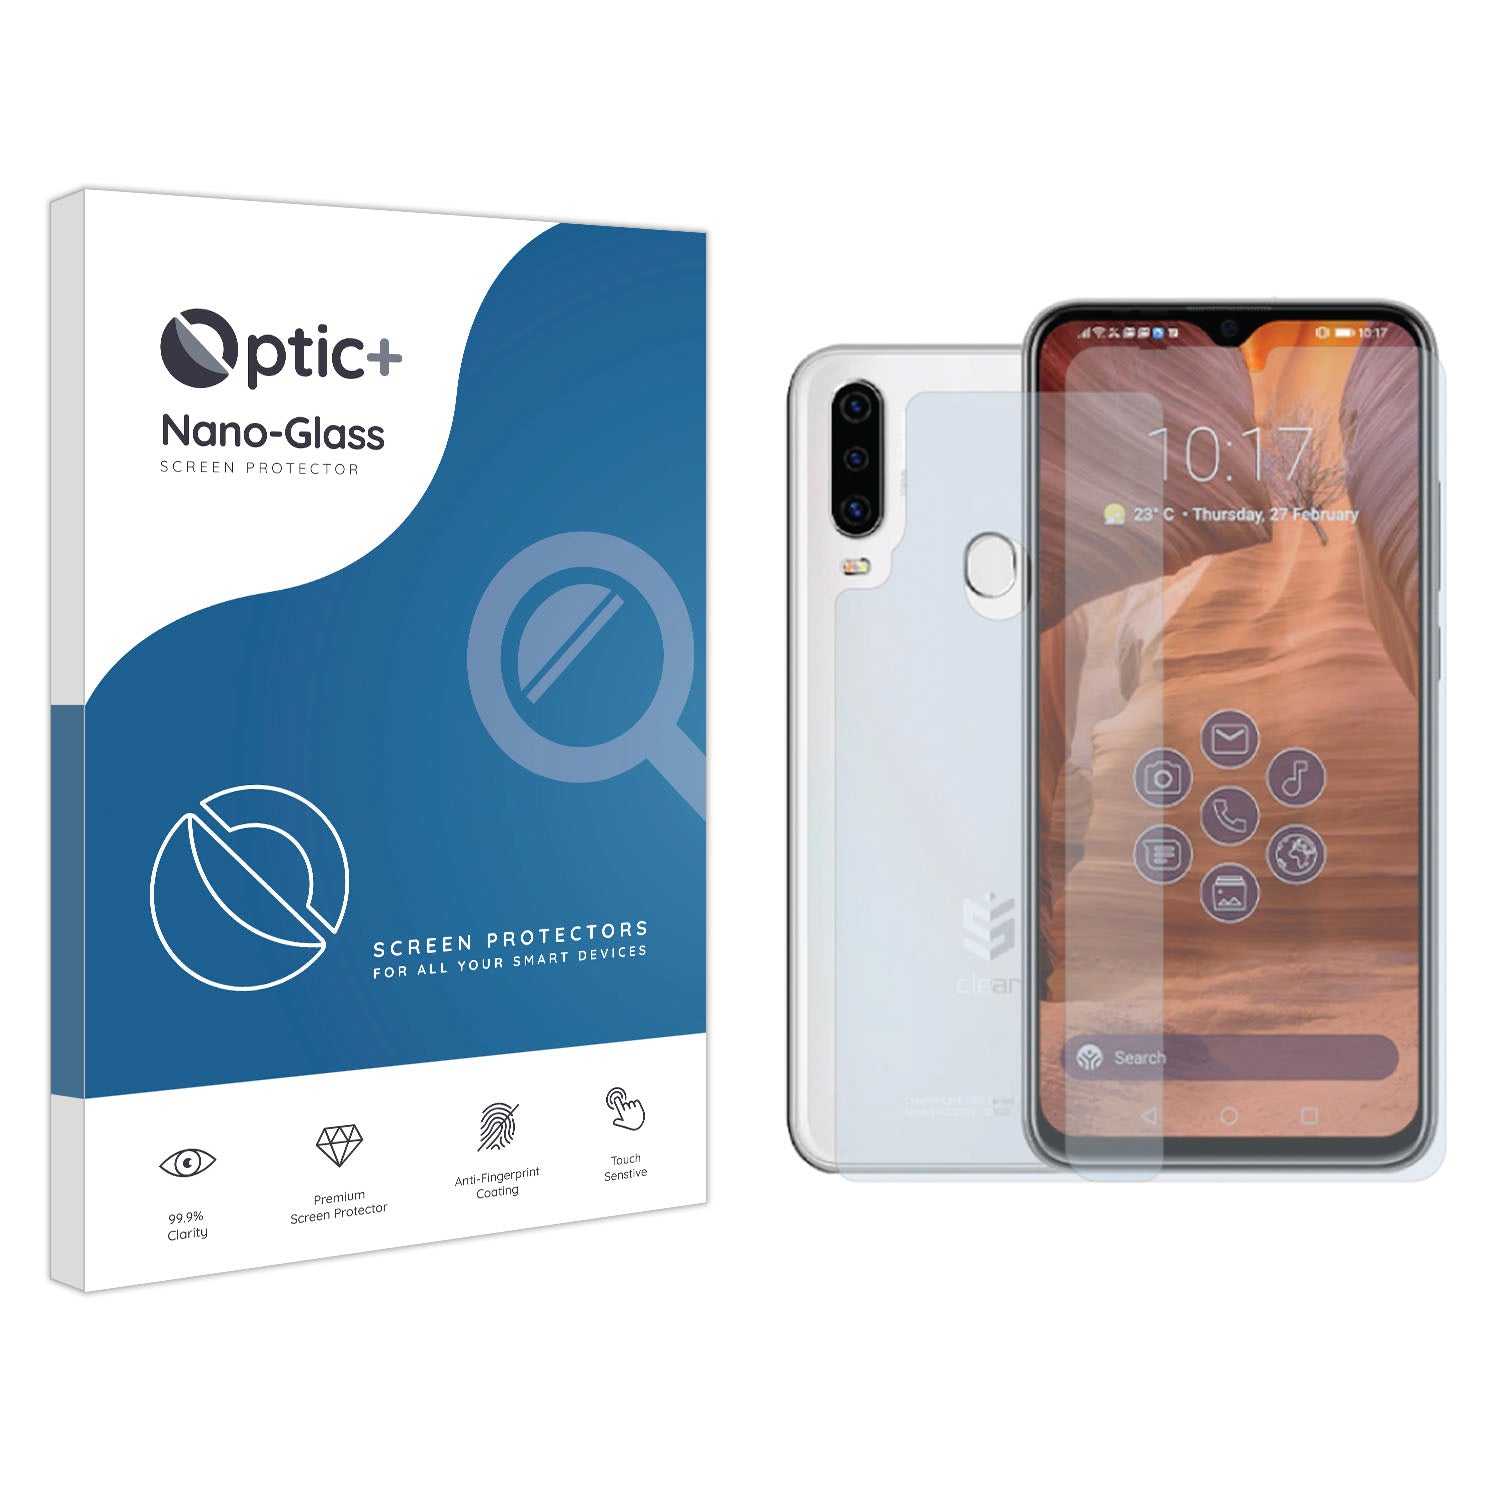 ScreenShield, Optic+ Nano Glass Screen Protector for ClearPHONE 420 (Front & Back)